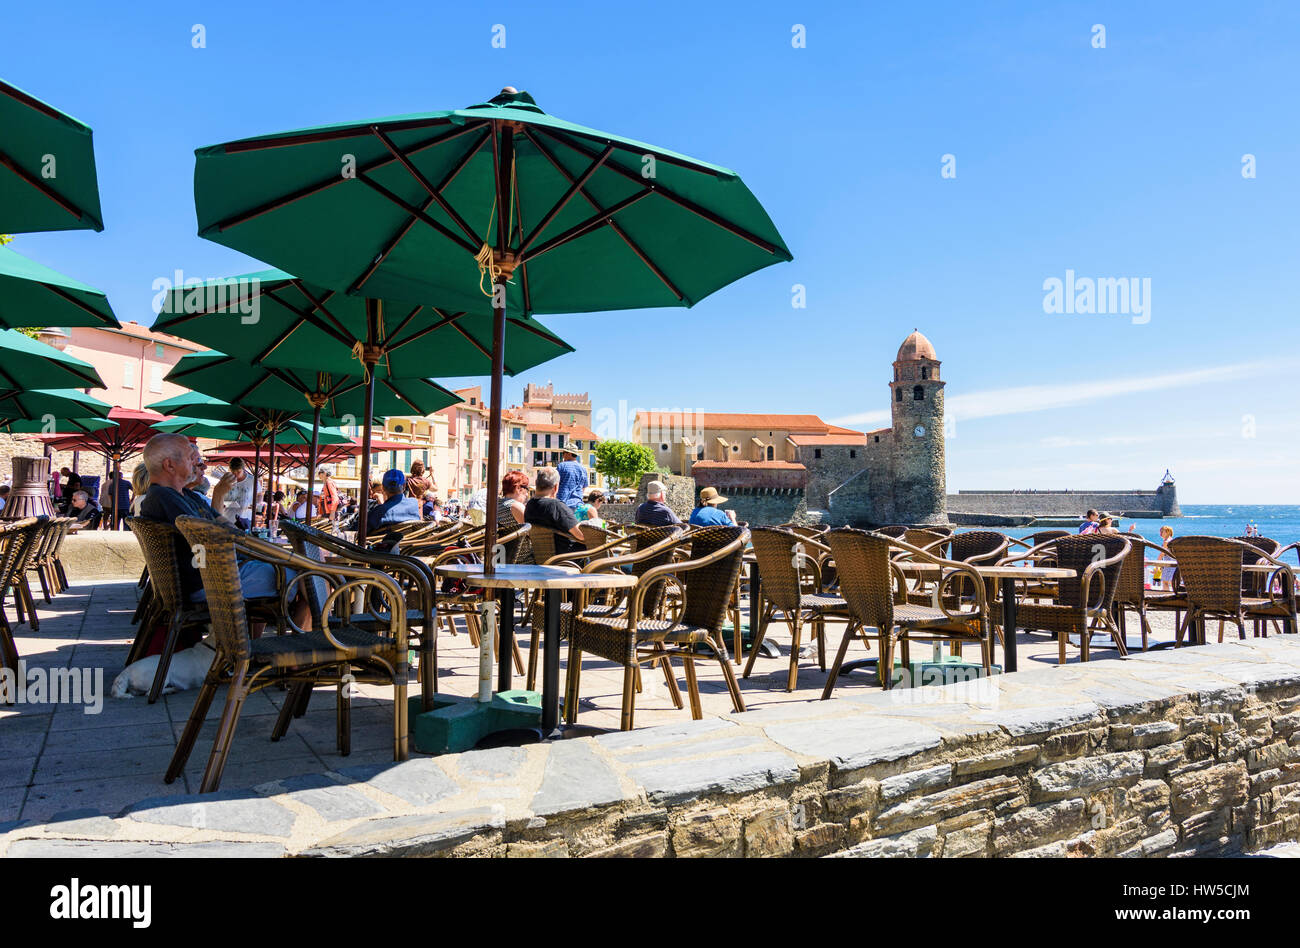 People at a seaside cafe overlooked by the bell tower of the Church of Notre Dame des Anges, Collioure, Côte Vermeille, France Stock Photo